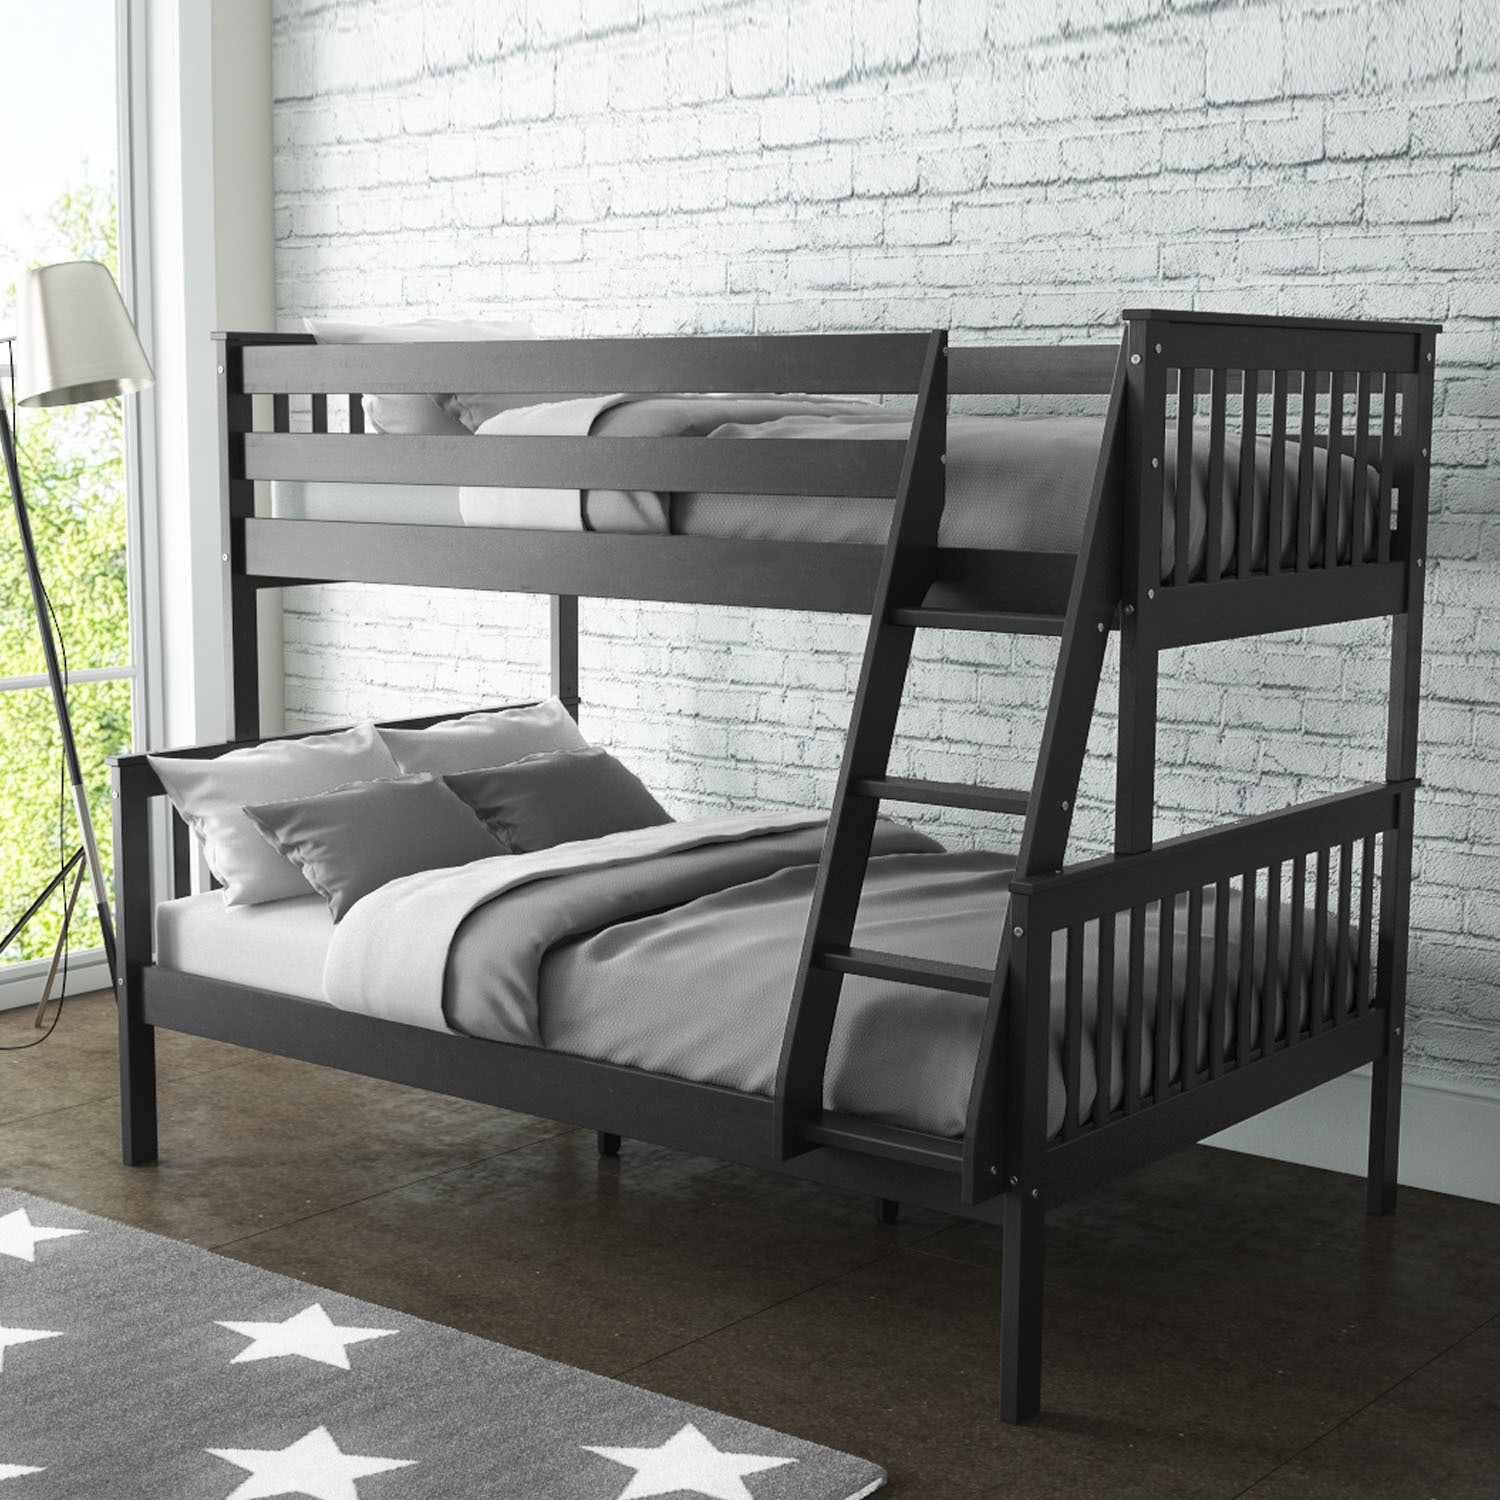 Oxford Triple Bunk Bed In Dark Grey, Small Double Bunk Bed With Trundle